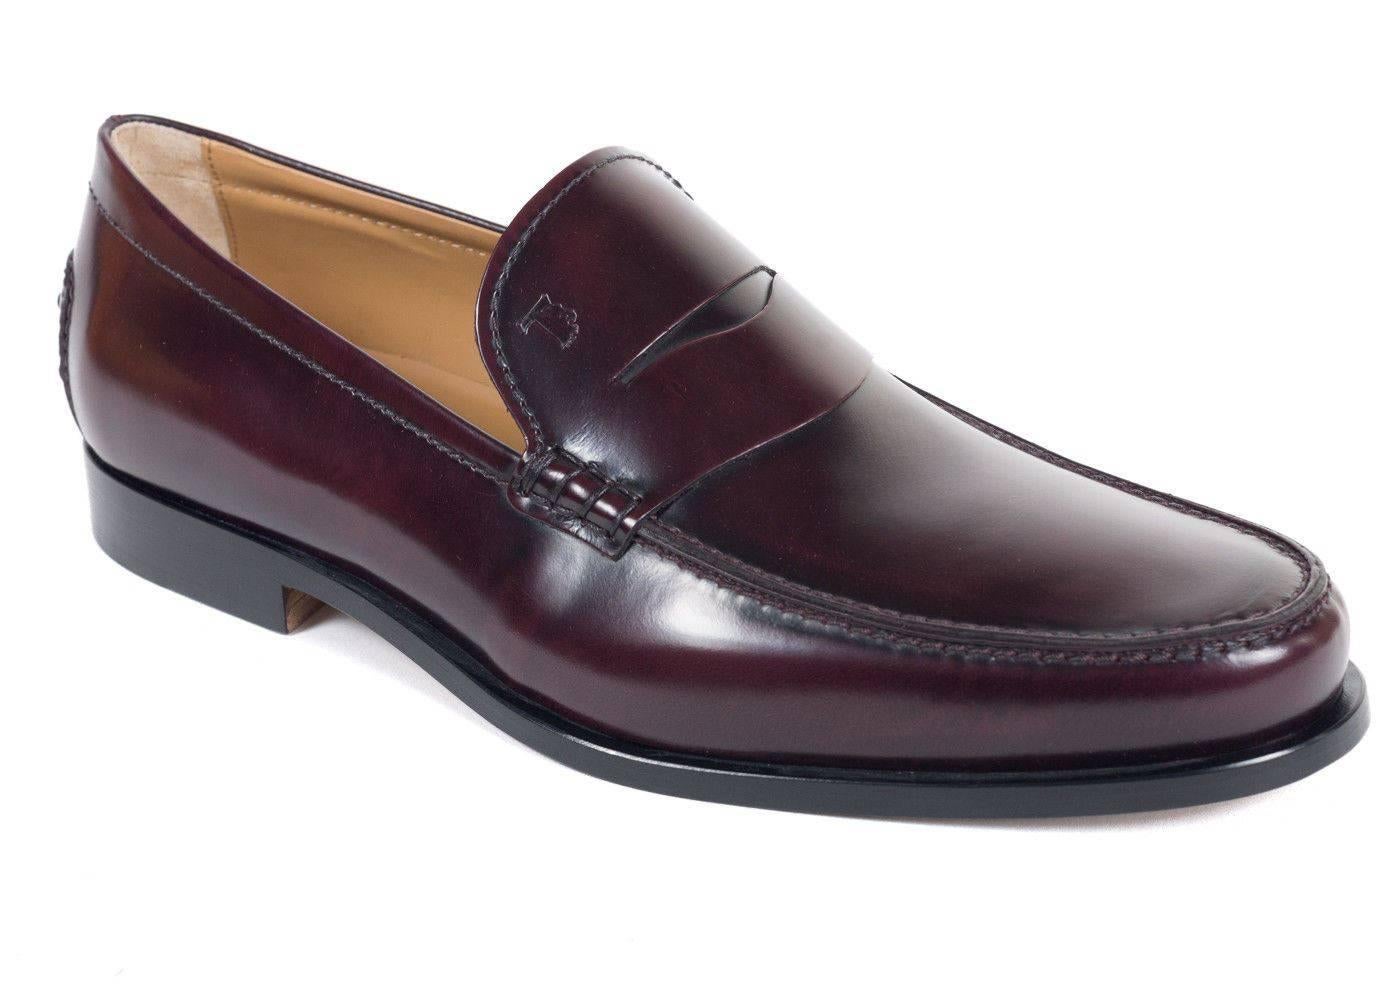 Brand New Tod's Men's Loafers
Original Box & Dust Bag Included
Retails in Stores & Online for $475
Size UK10 / US11 
All Shoes are in UK Sizing


Tod's classic penny loafers crafted in burgundy calfskin leather for an ultra smooth look to these